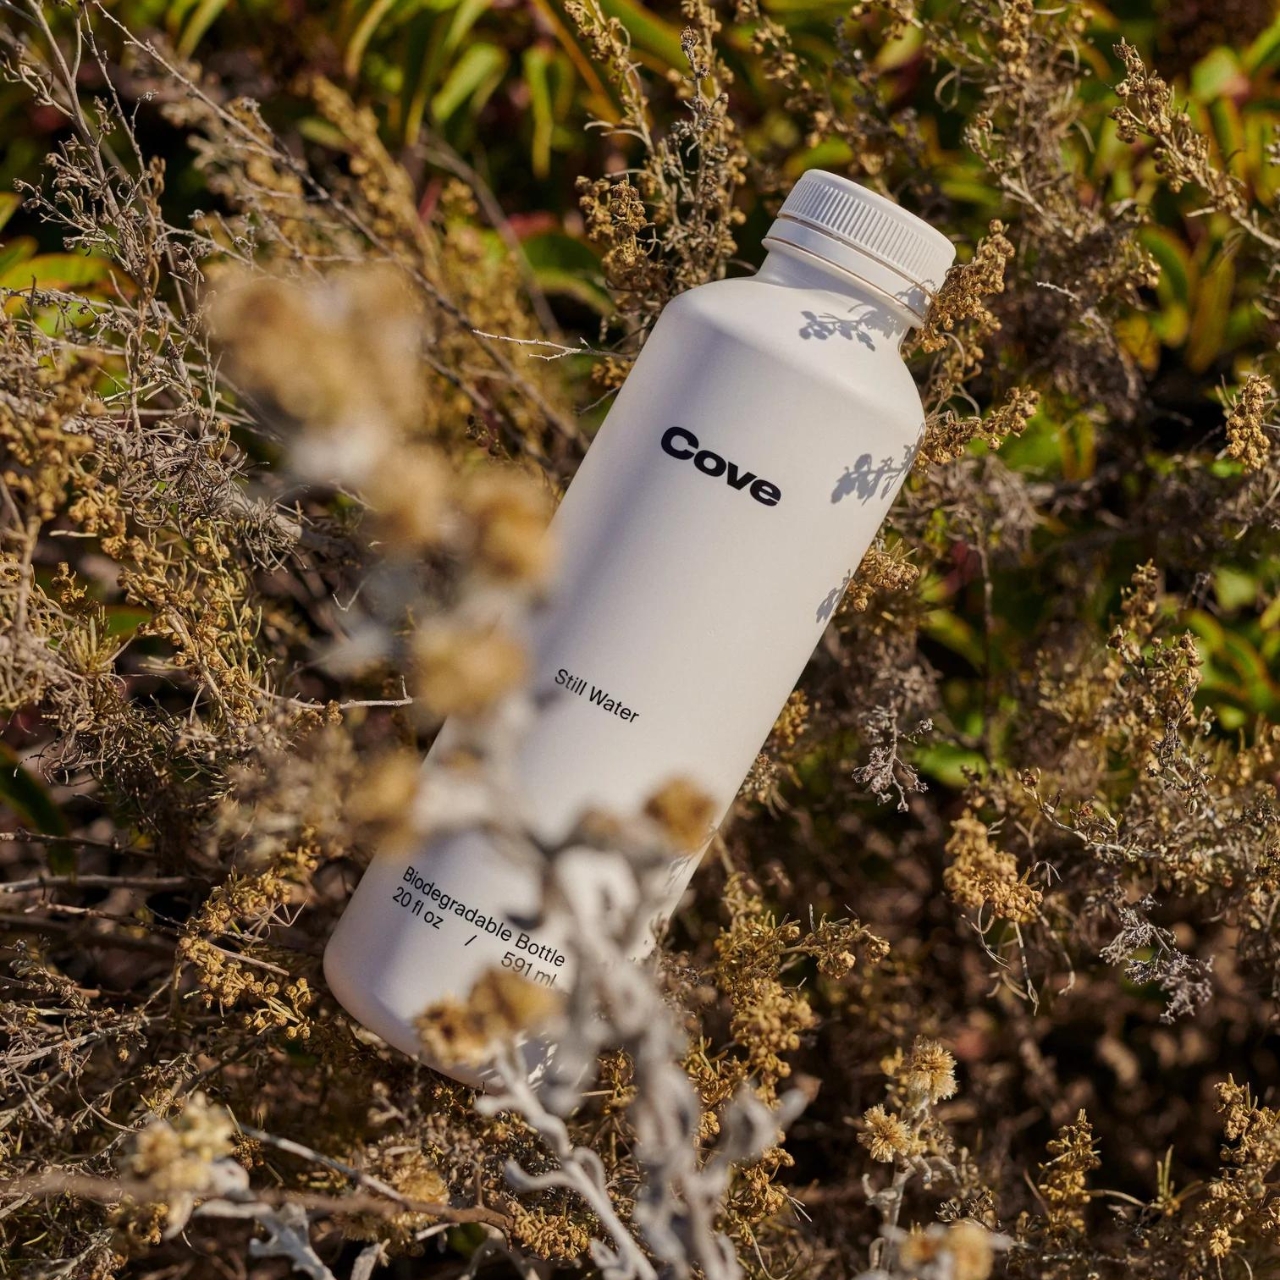 World’s first biodegradable water bottles made with PHA degrade 200 times faster than plastic